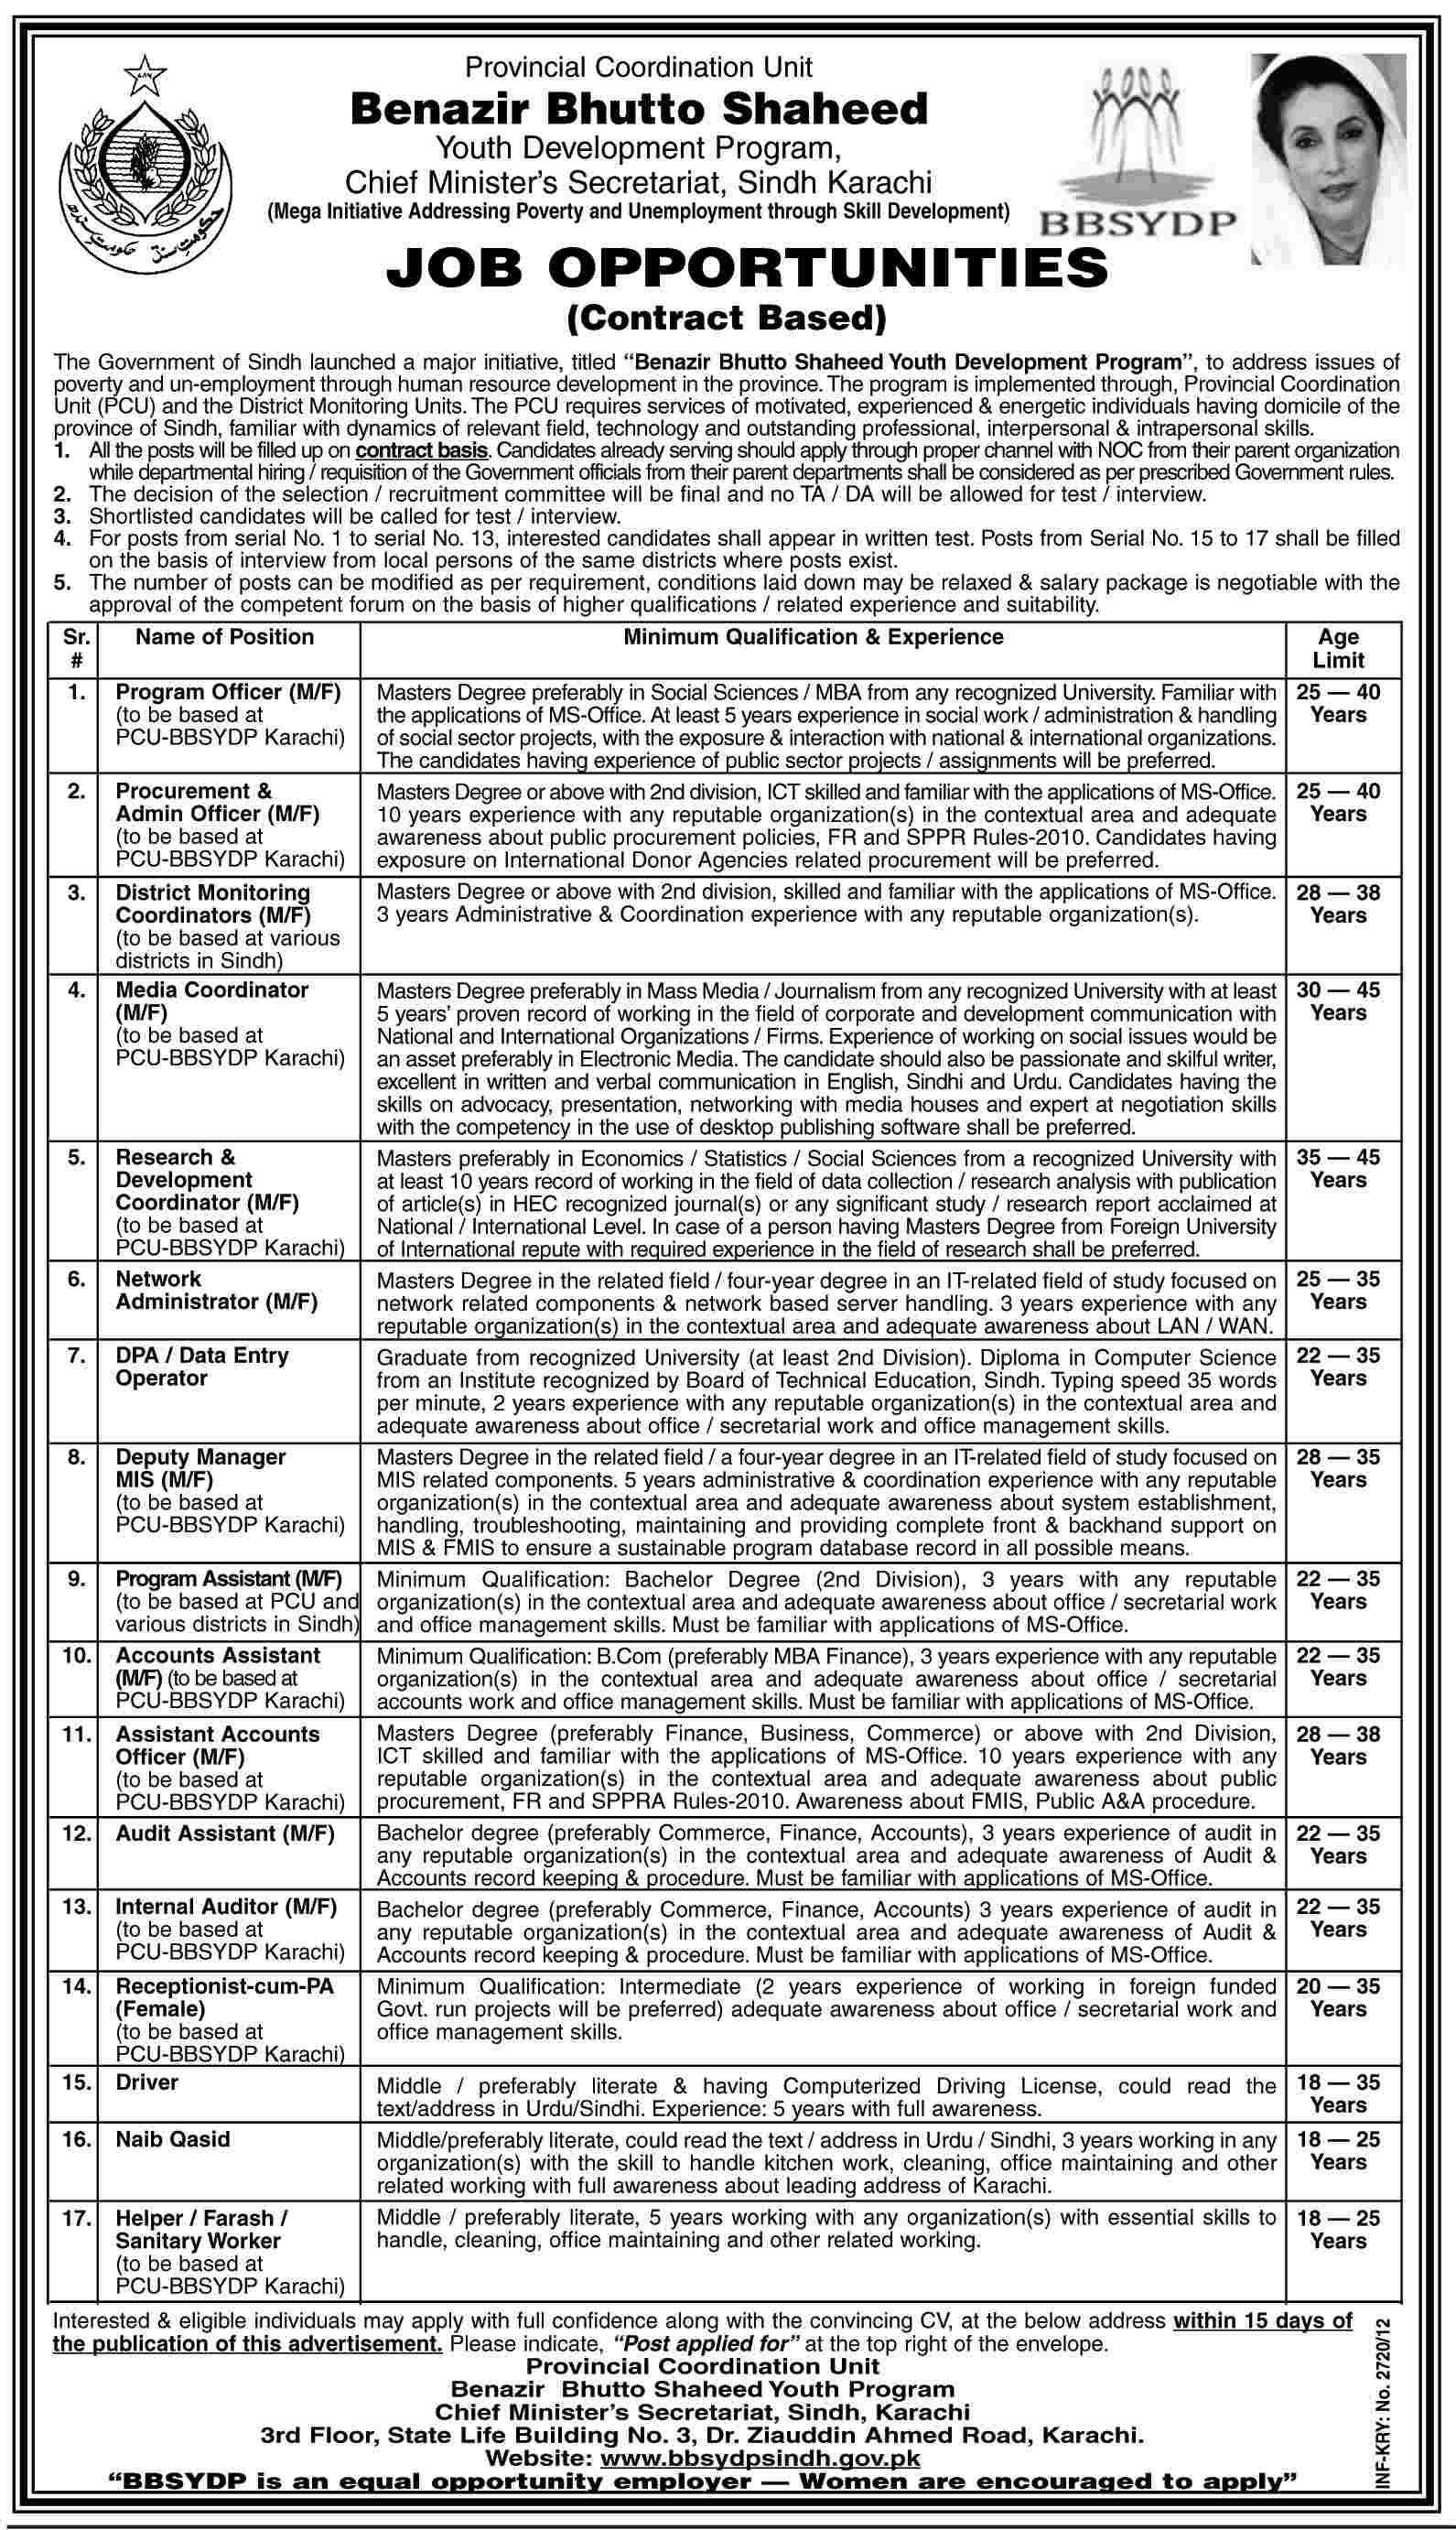 BBSYDP (Benazir Bhutto Shaheed Youth Development Programe) (Provincial Coordination Unit) Required Management and Accounts Staff (Govt. job)